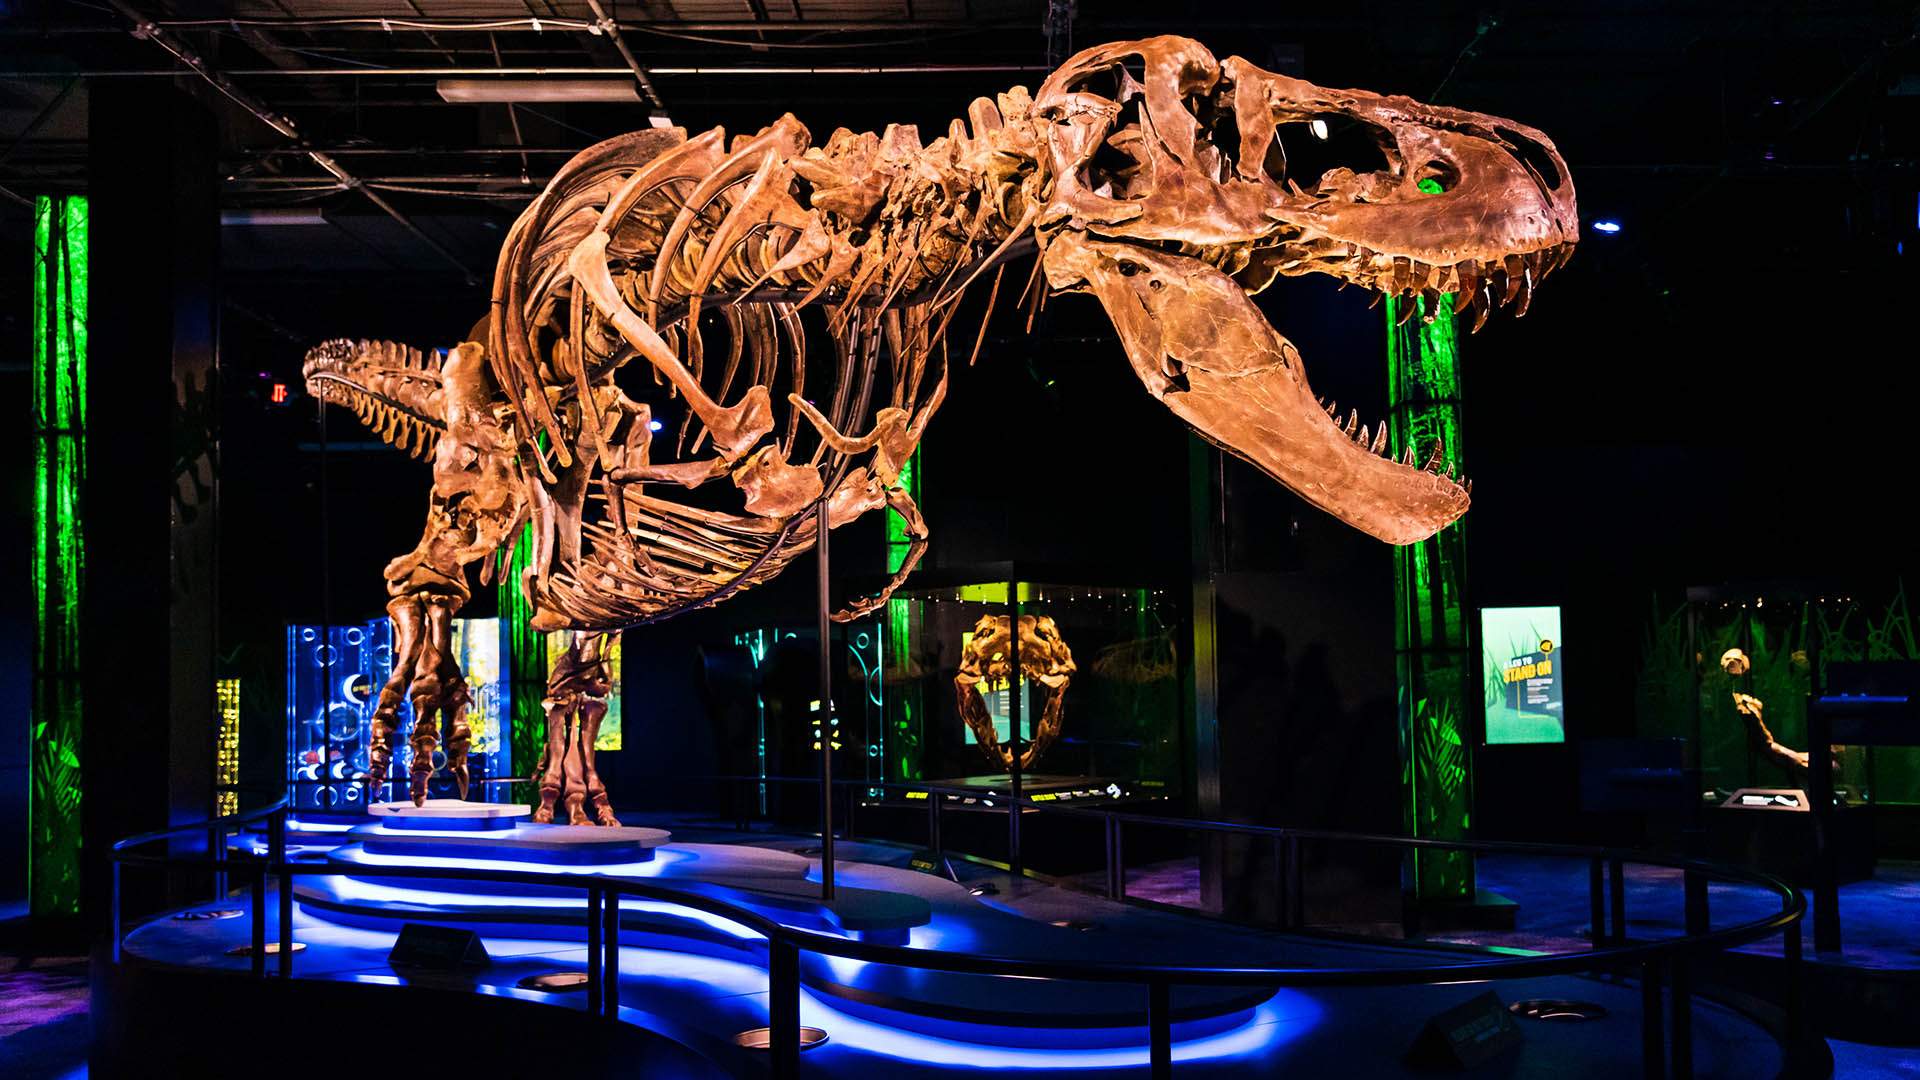 One of the Biggest and Most Complete Tyrannosaurus Rex Fossils in the World Is Coming to Australia